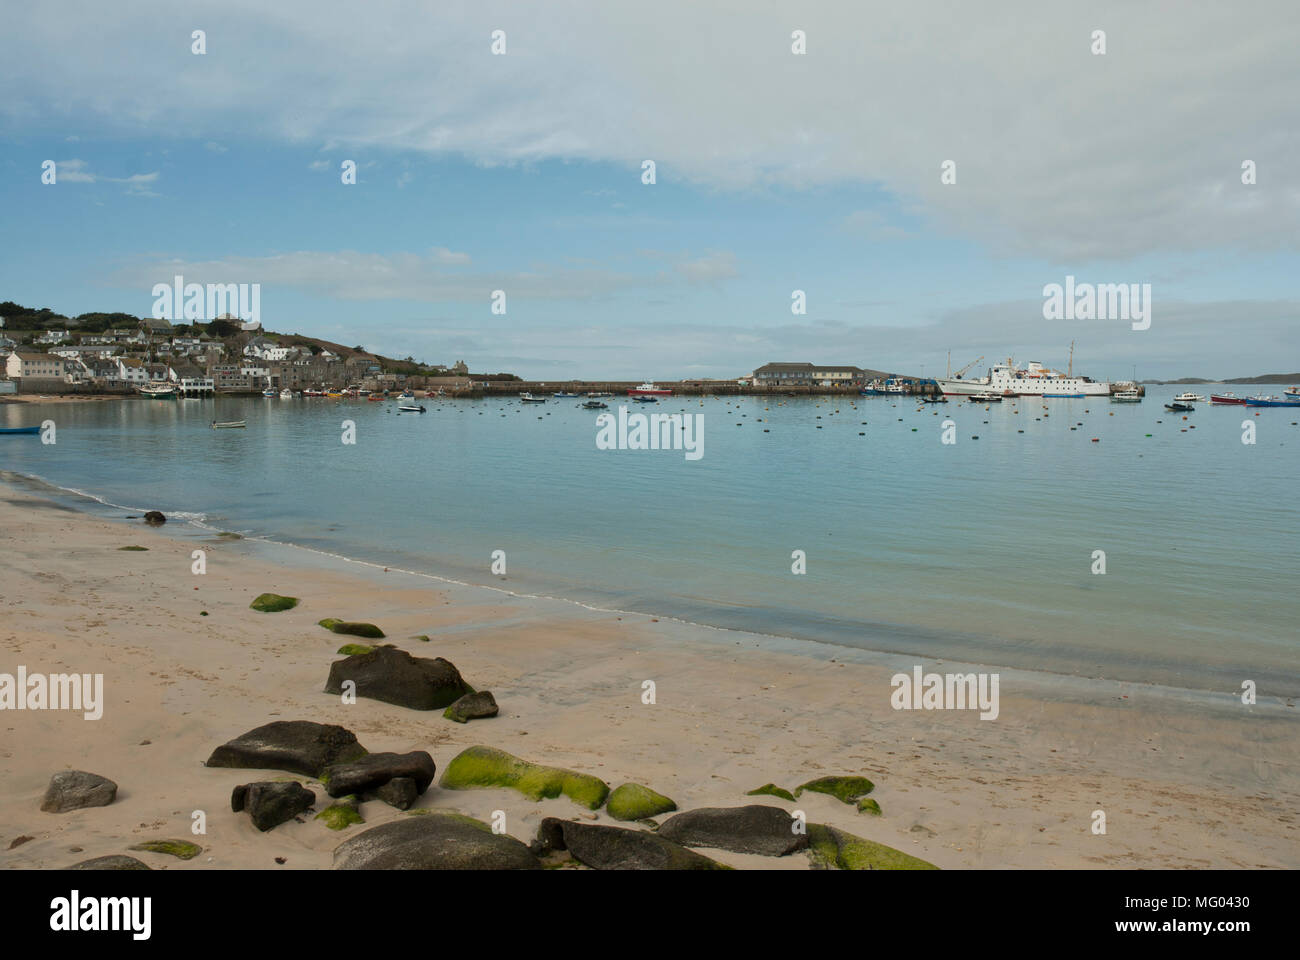 View across St Mary's Harbour, Isles of Scilly showing Town Beach with the Scillonian ferry moored at the quayside. Pale blue morning light. Stock Photo